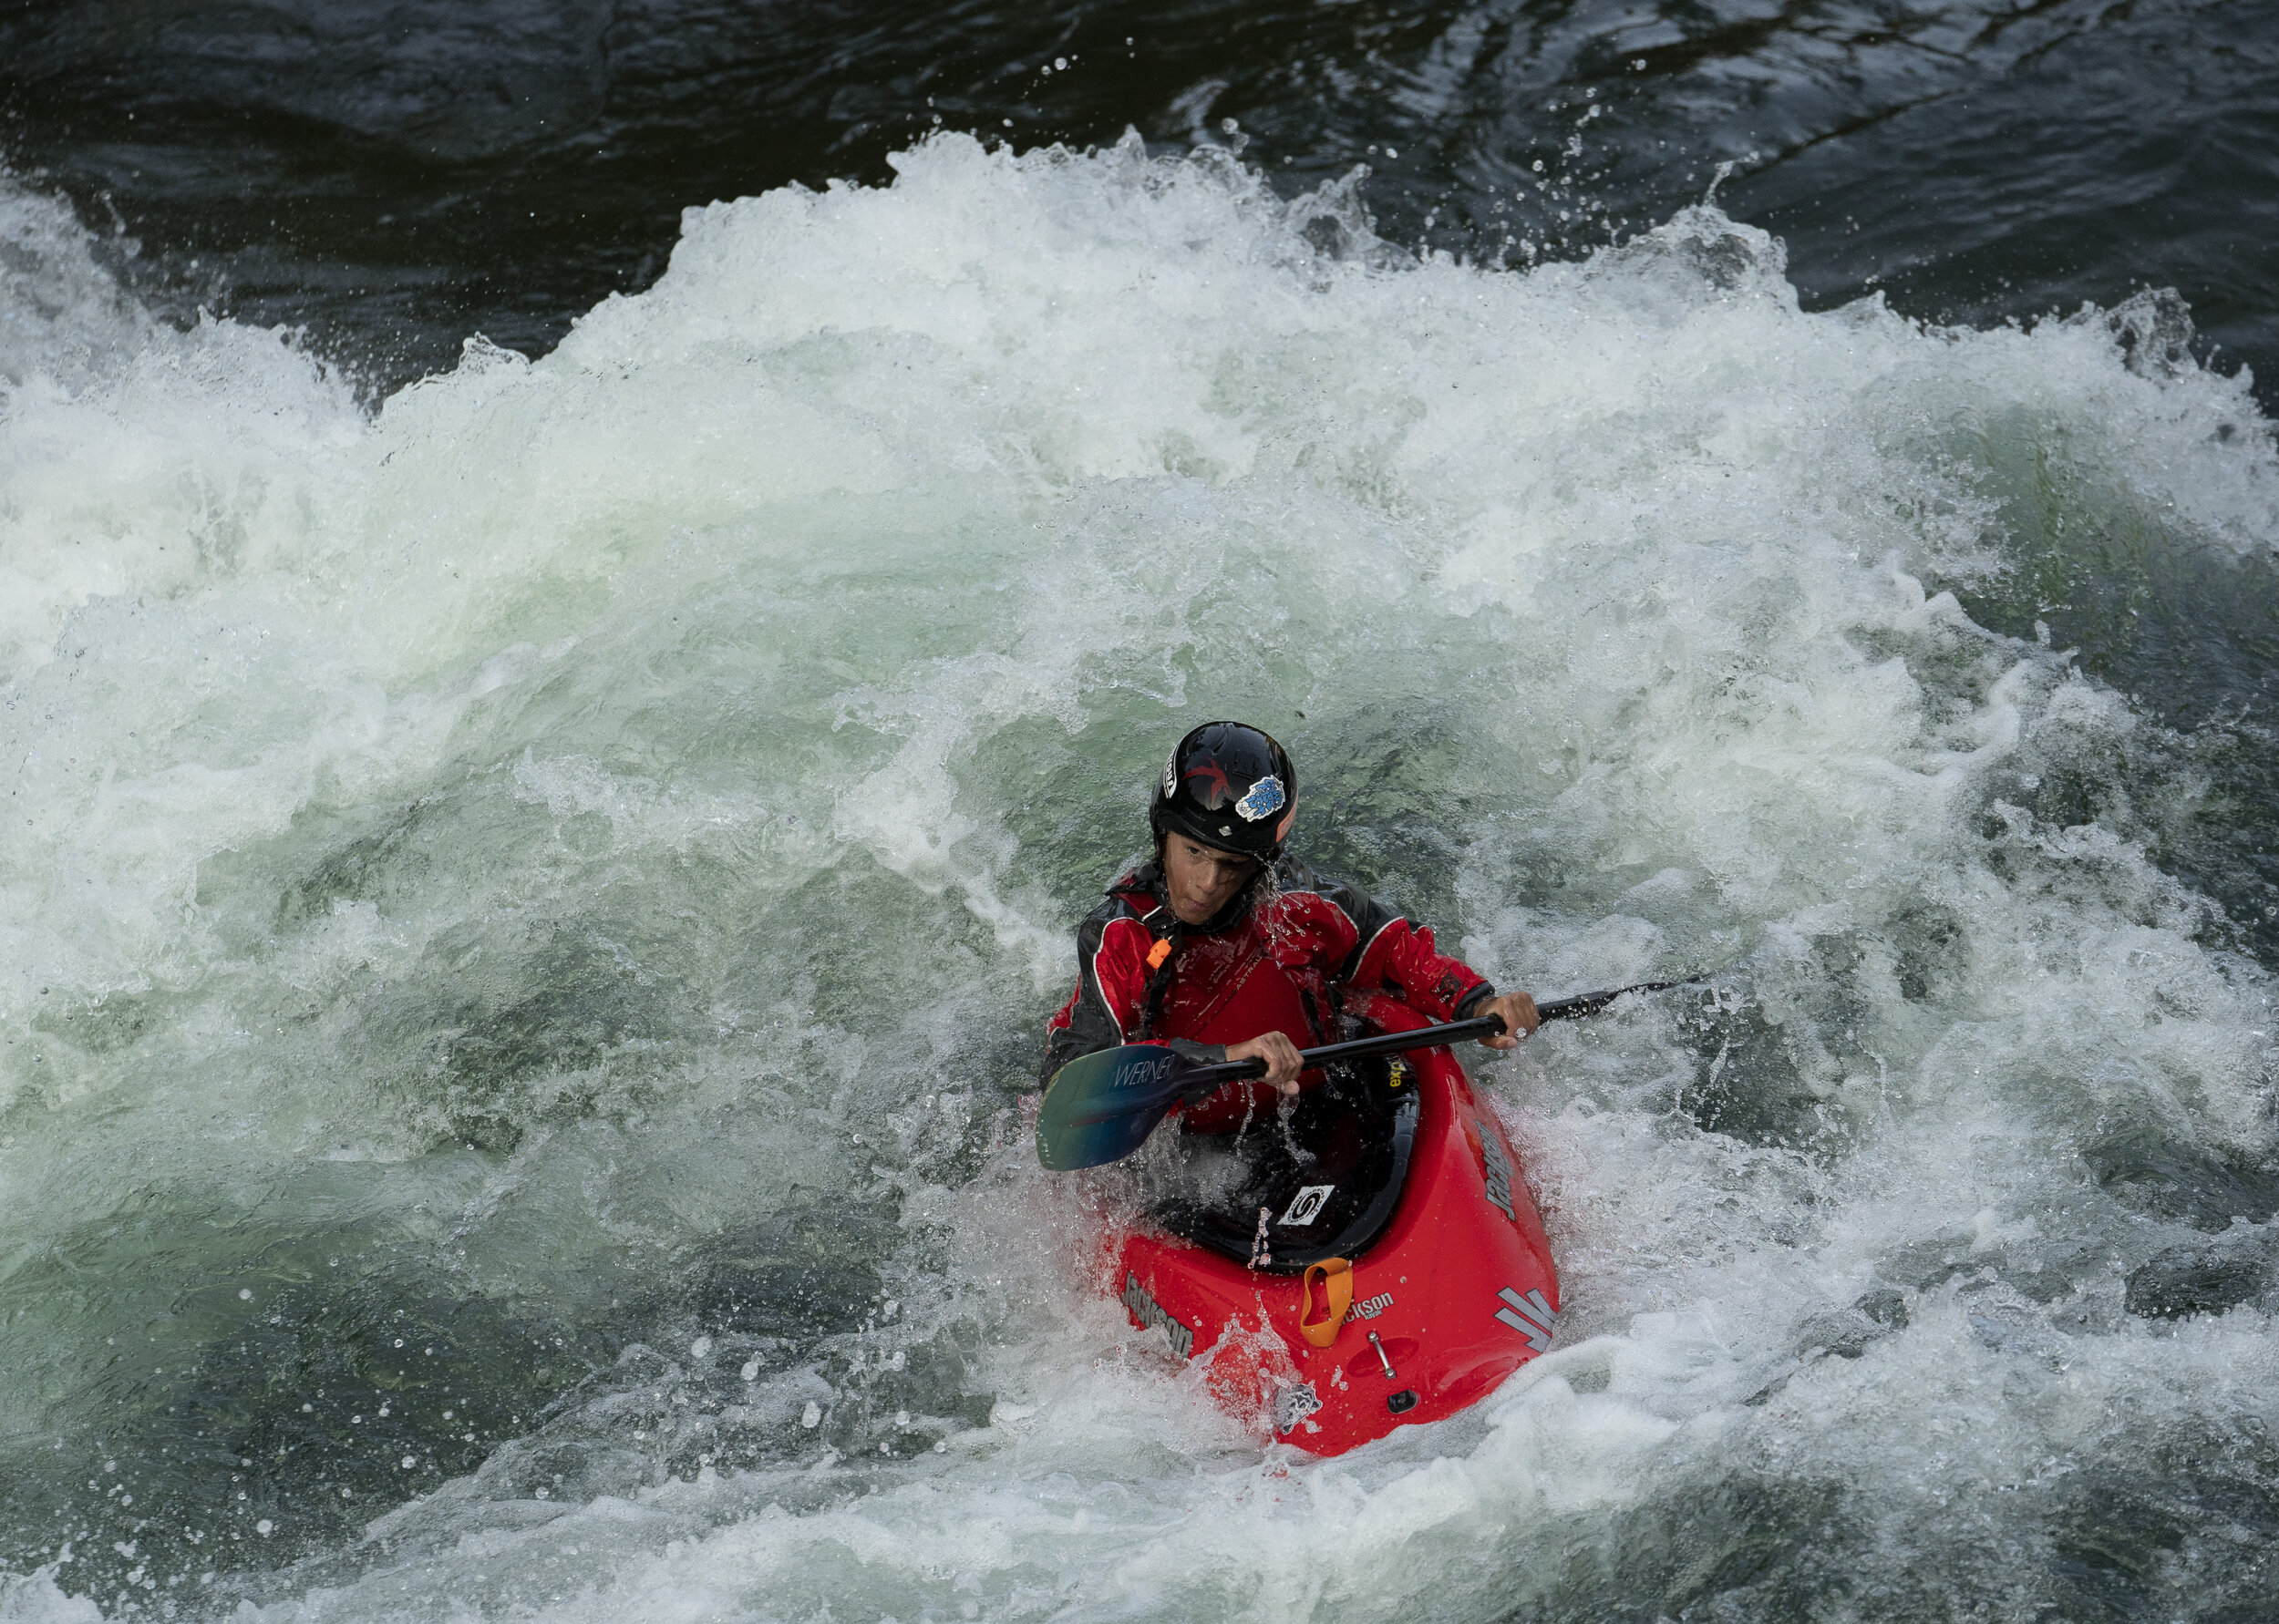  Images of whitewater kayakers on the Snake River near Hoback, WY, on Thur. Sept. 9, 2021. 